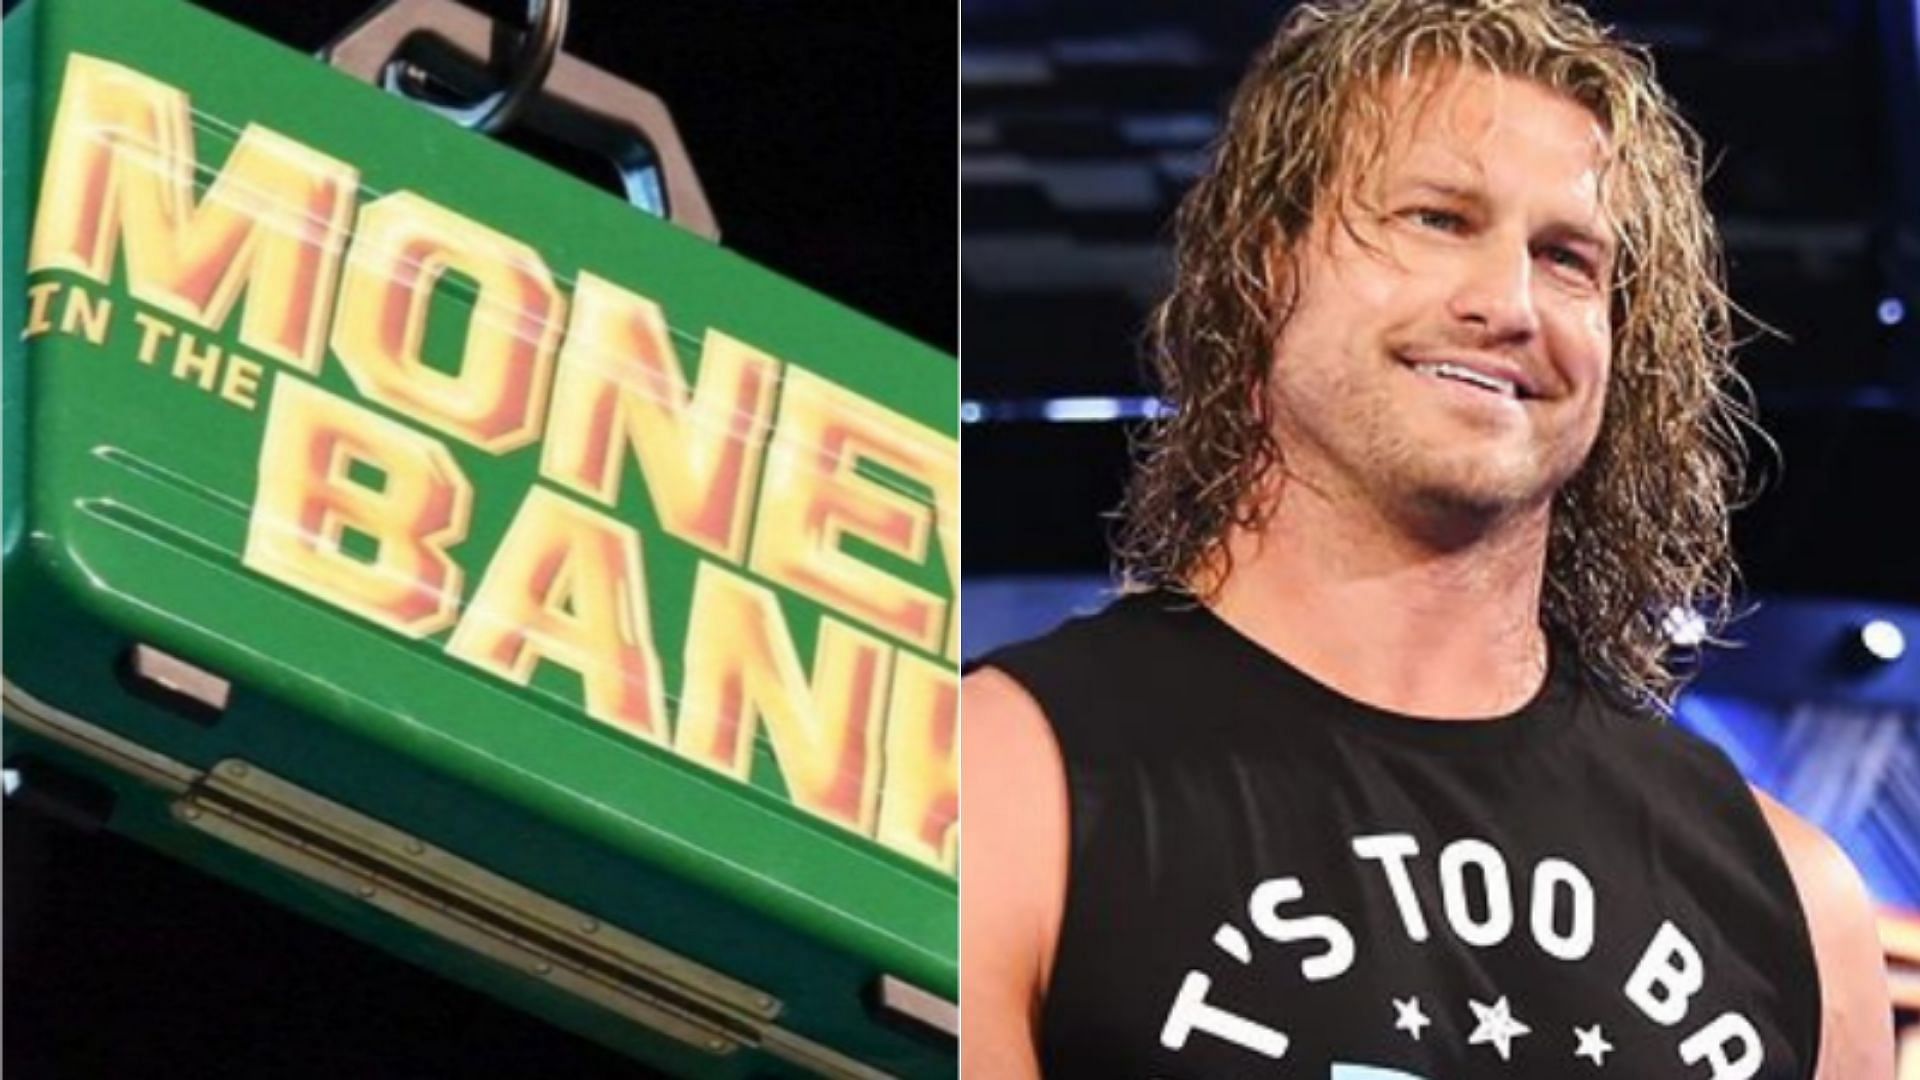 Dolph Ziggler won the Money in the Bank briefcase in 2012